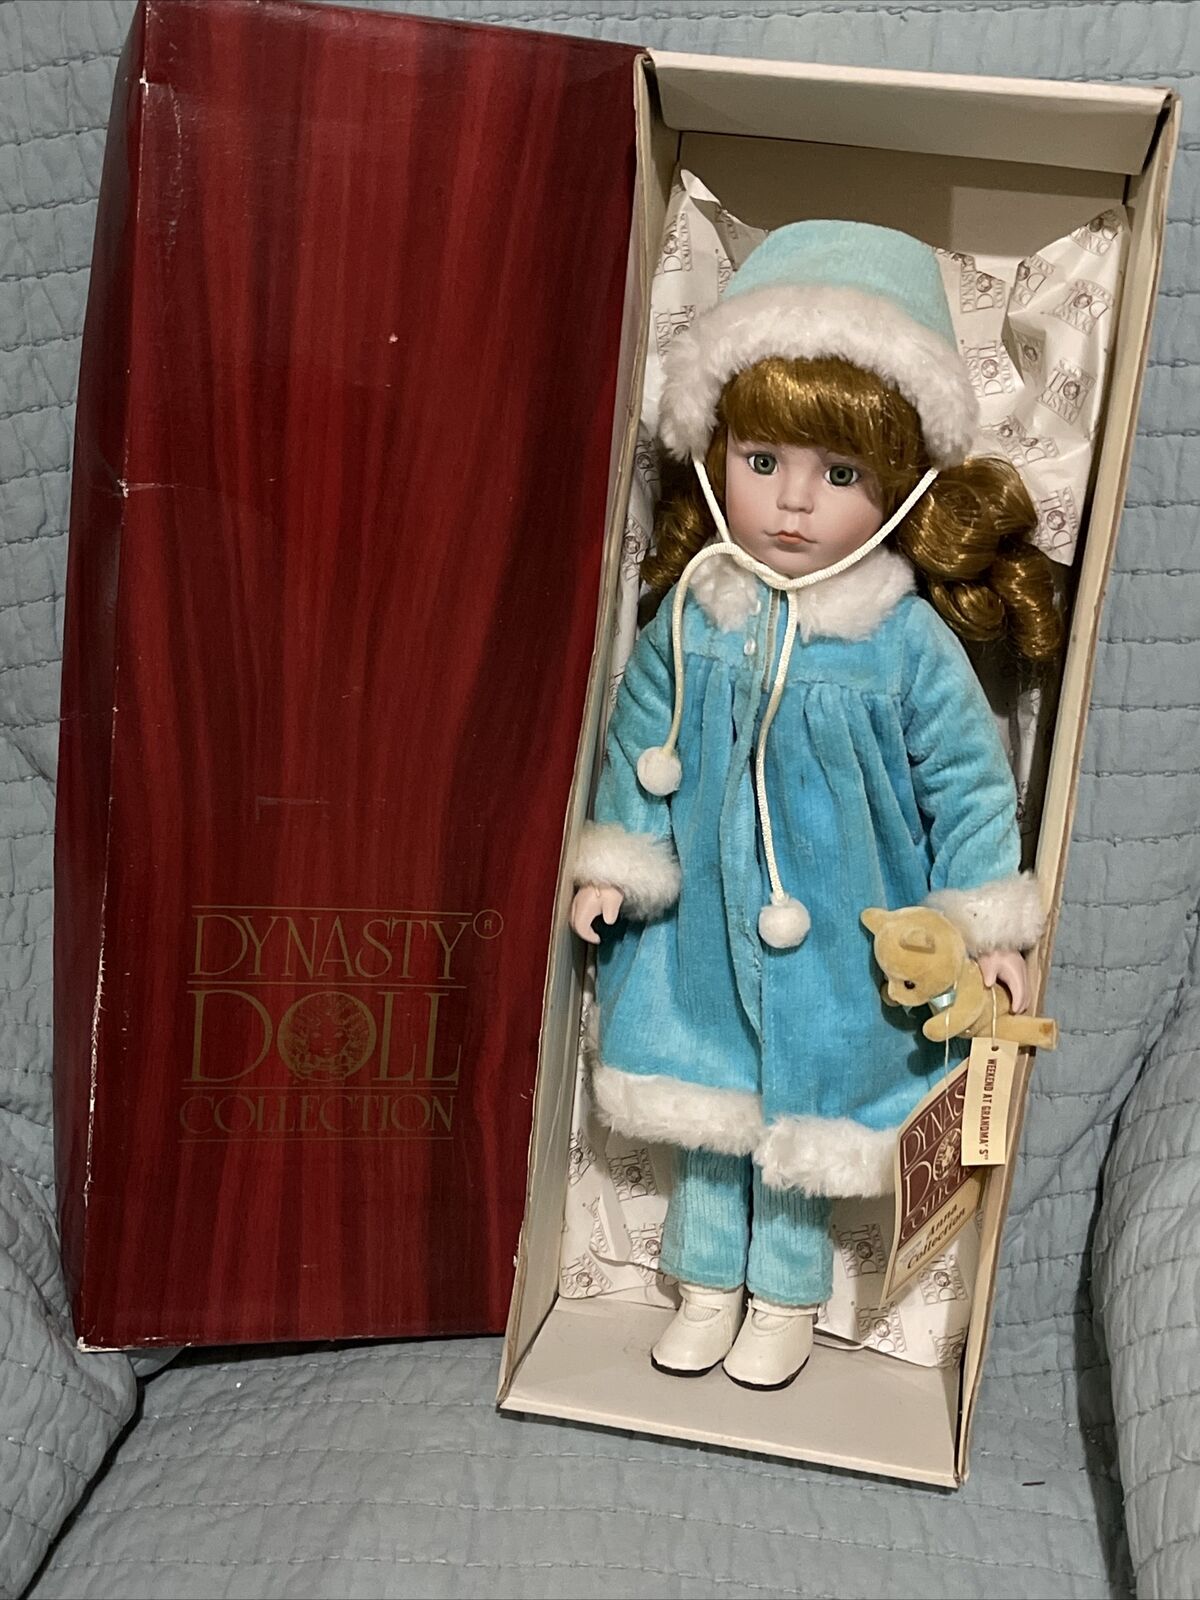 Dynasty Doll Anna Collection Weekend At Grandmas Vintage Bisque 16" Doll & Teddy